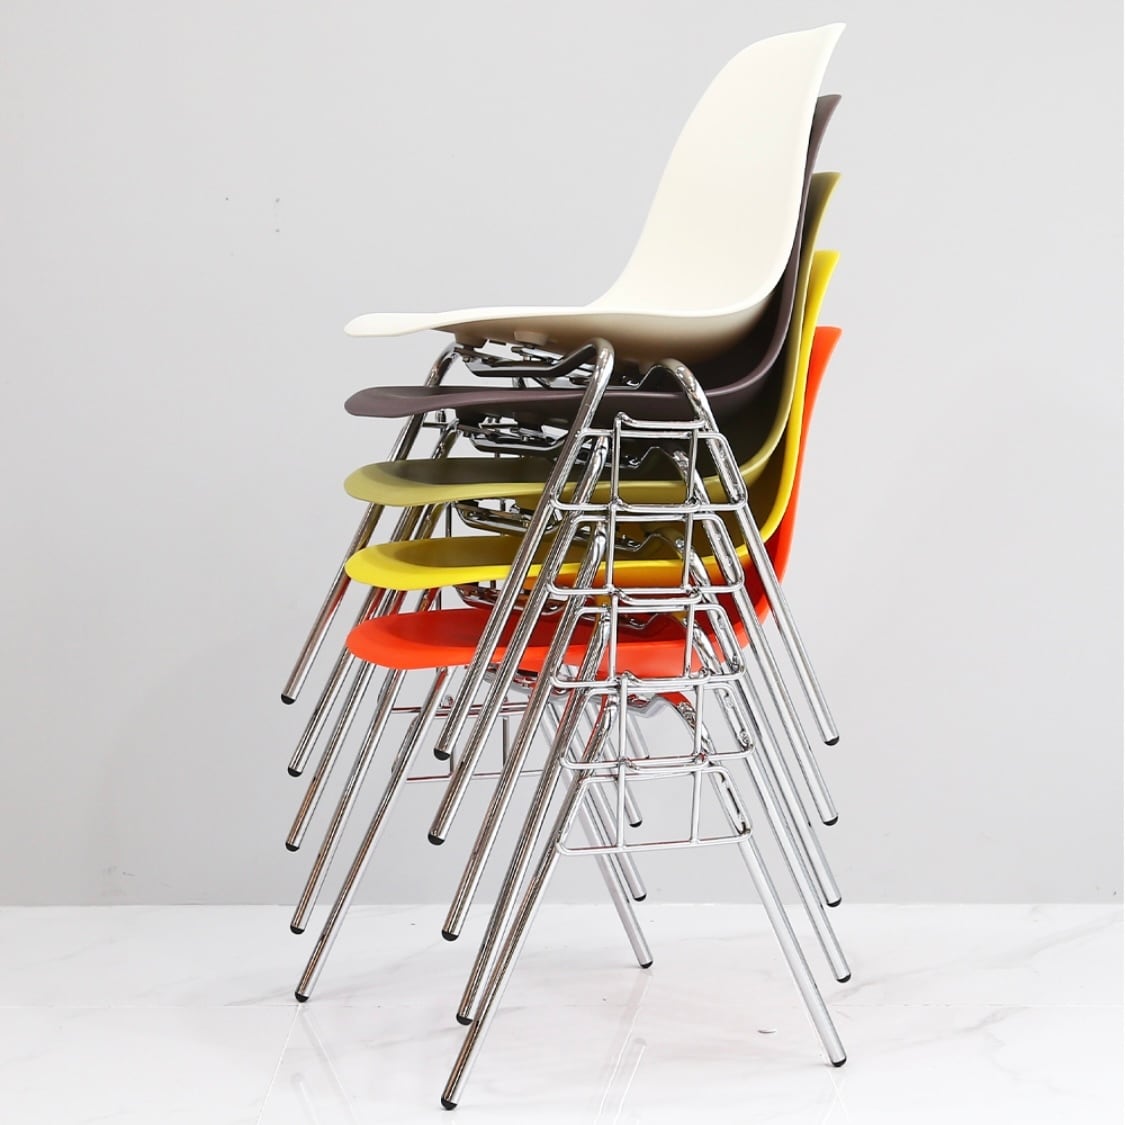 DSS interior chair 6colors / インテリア チェアー クリア ダイニング 透明 椅子 韓国 北欧 雑貨